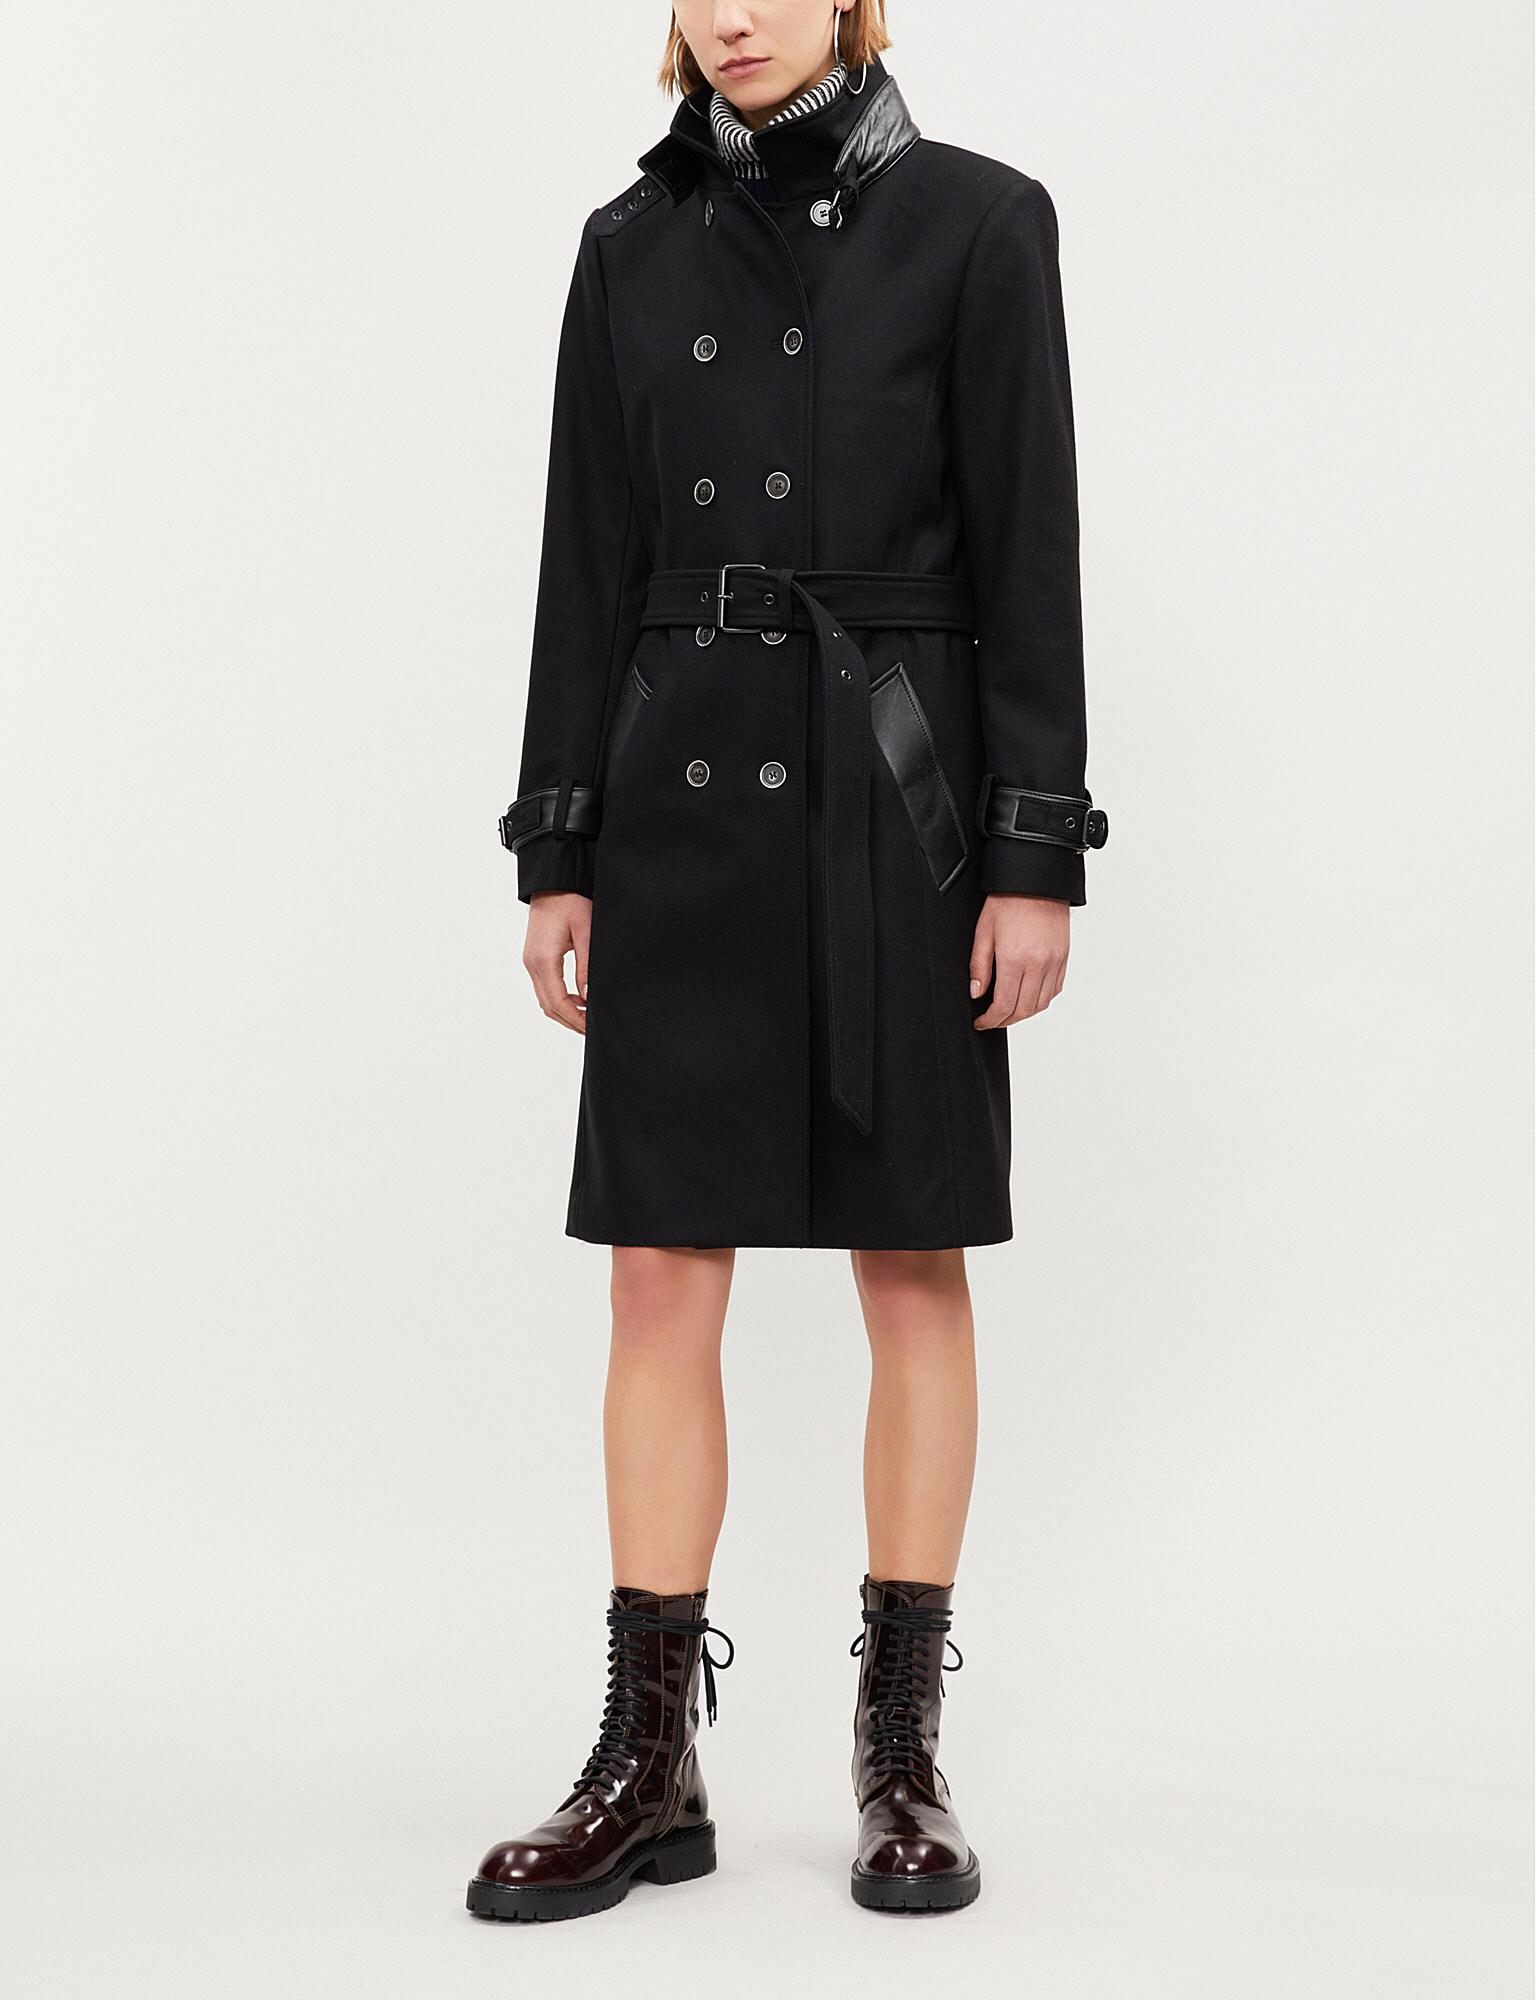 The Kooples High-neck Wool-blend Trench Coat in Black - Lyst